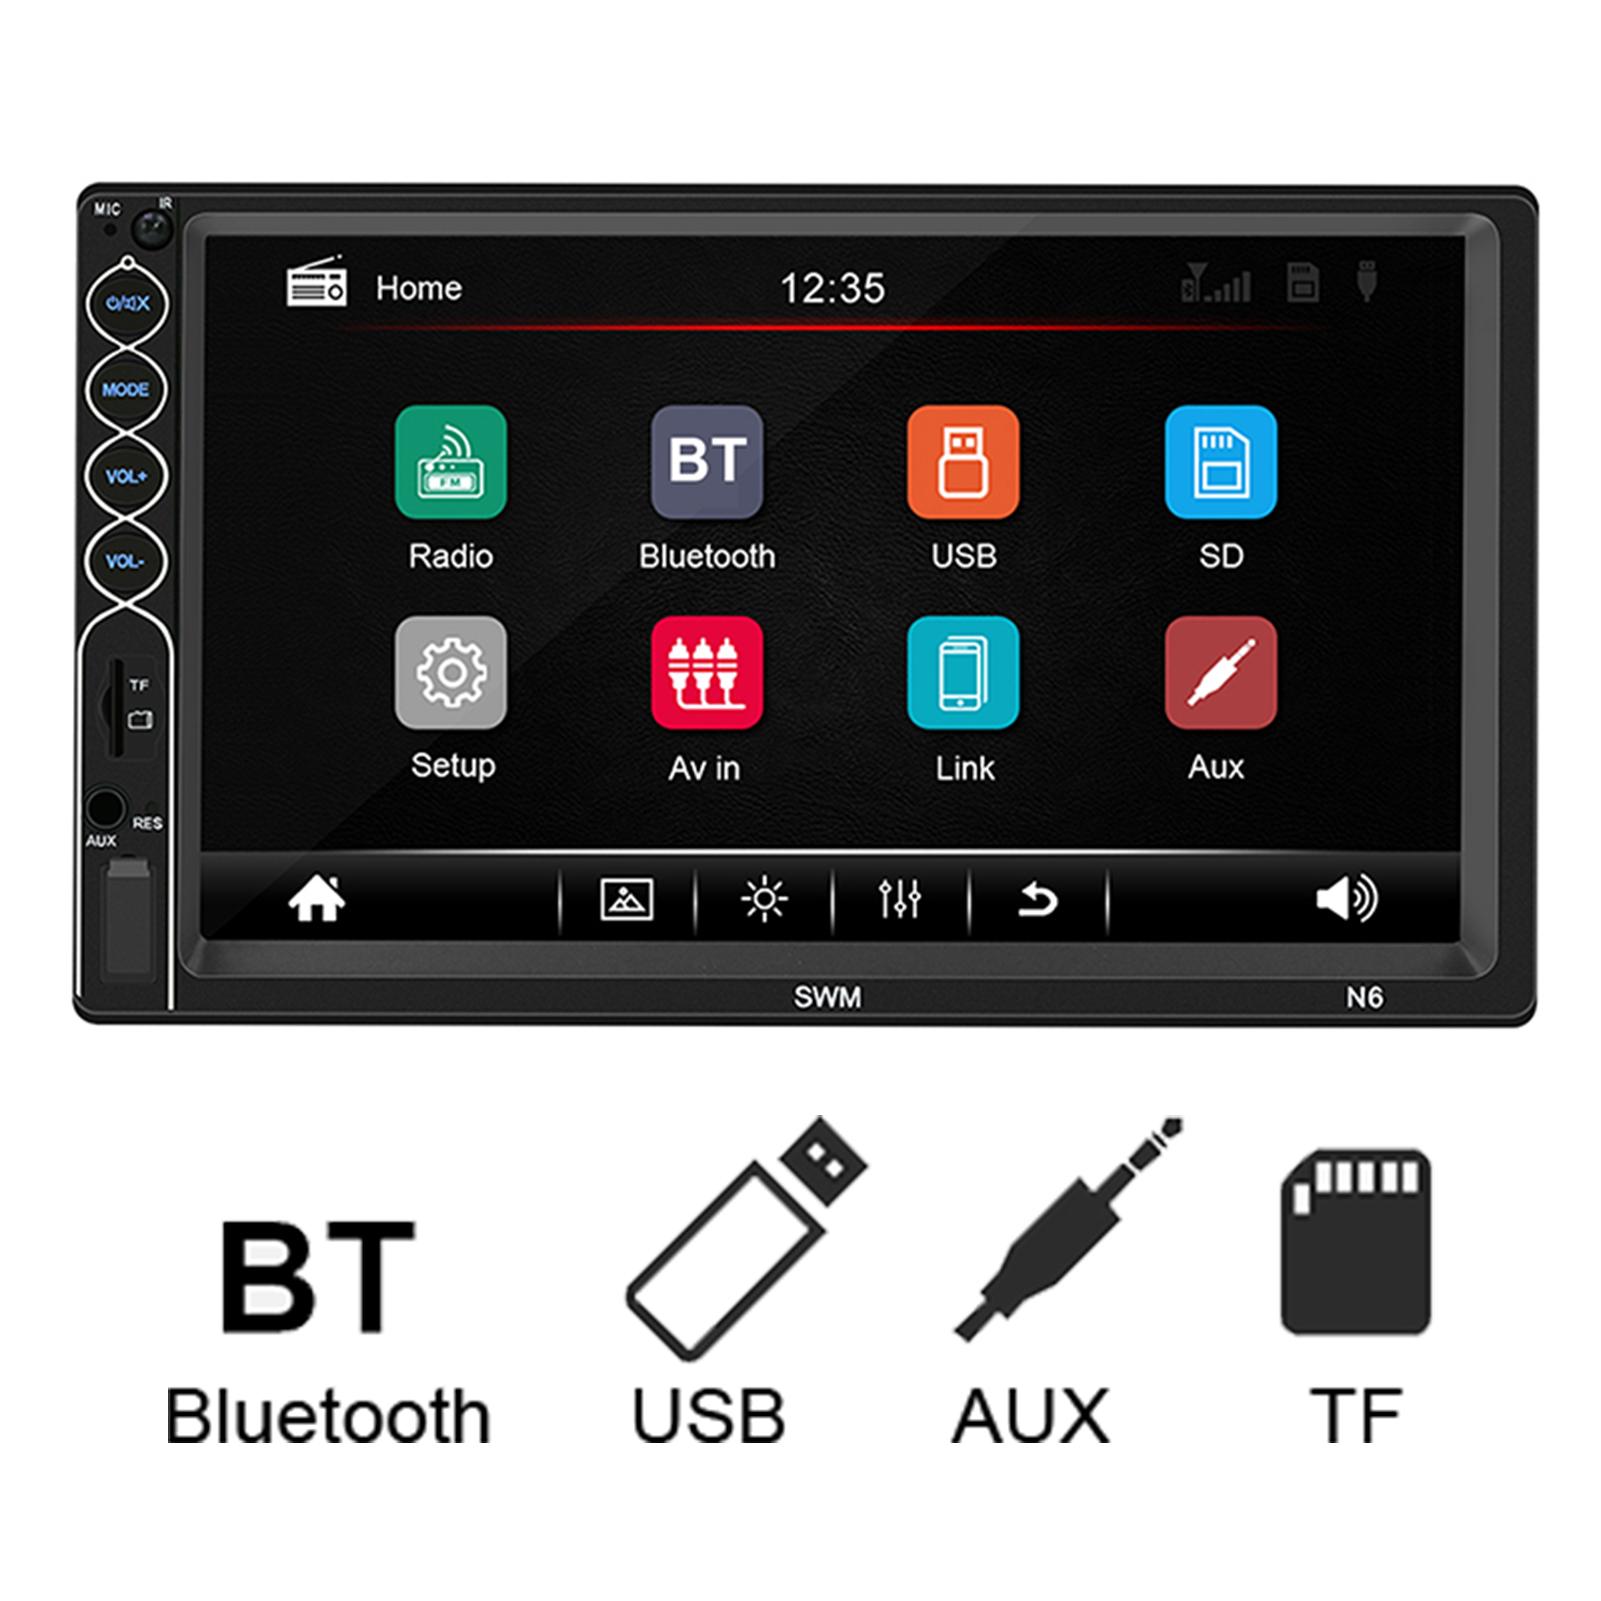 N6 7Inch 12V Scherm Usb 2.0 Interface High Definition Video Bluetooth Auto MP5 Video Player Tf Card Play aux Spelen Auto Accessoires